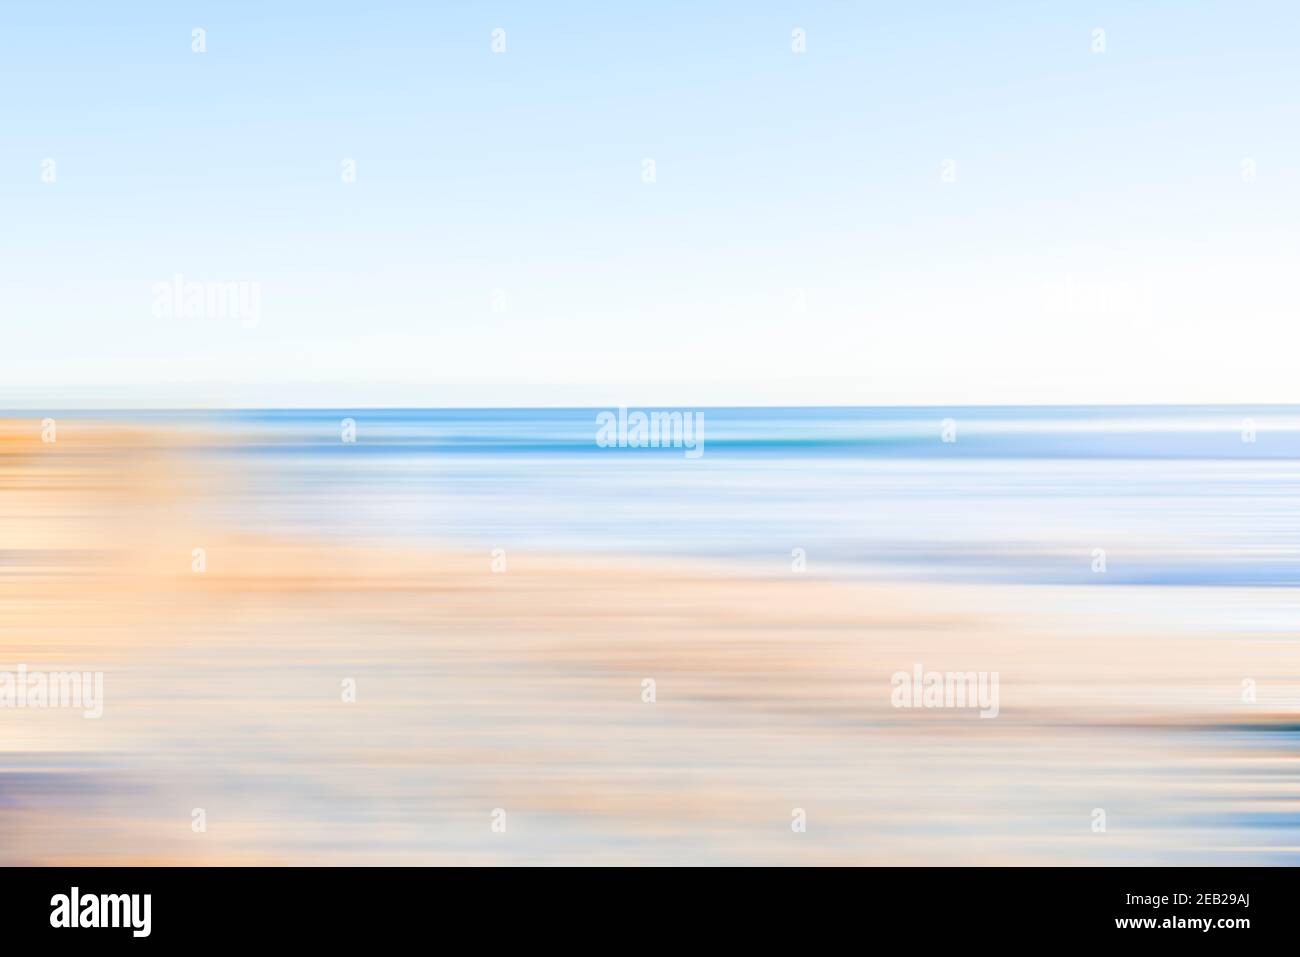 Coastal beachside blur in soft tones of blue and brown. Stock Photo